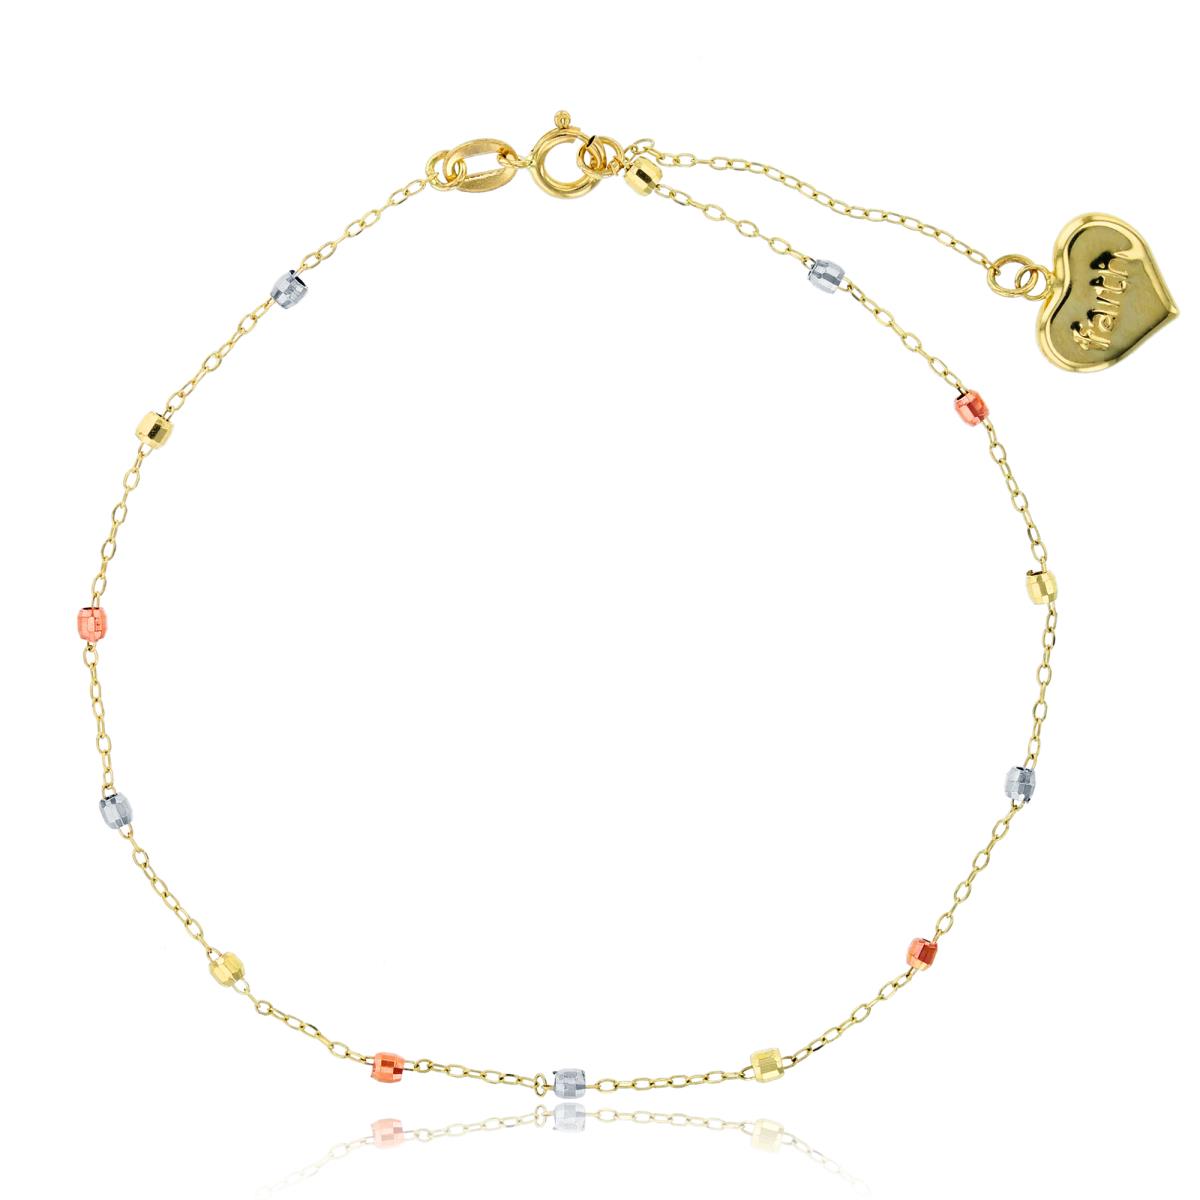 14K Tricolor Gold DC Cable Chain with Mirror Beads Puff Heart "Faith" Drop 7+1" Bracelet